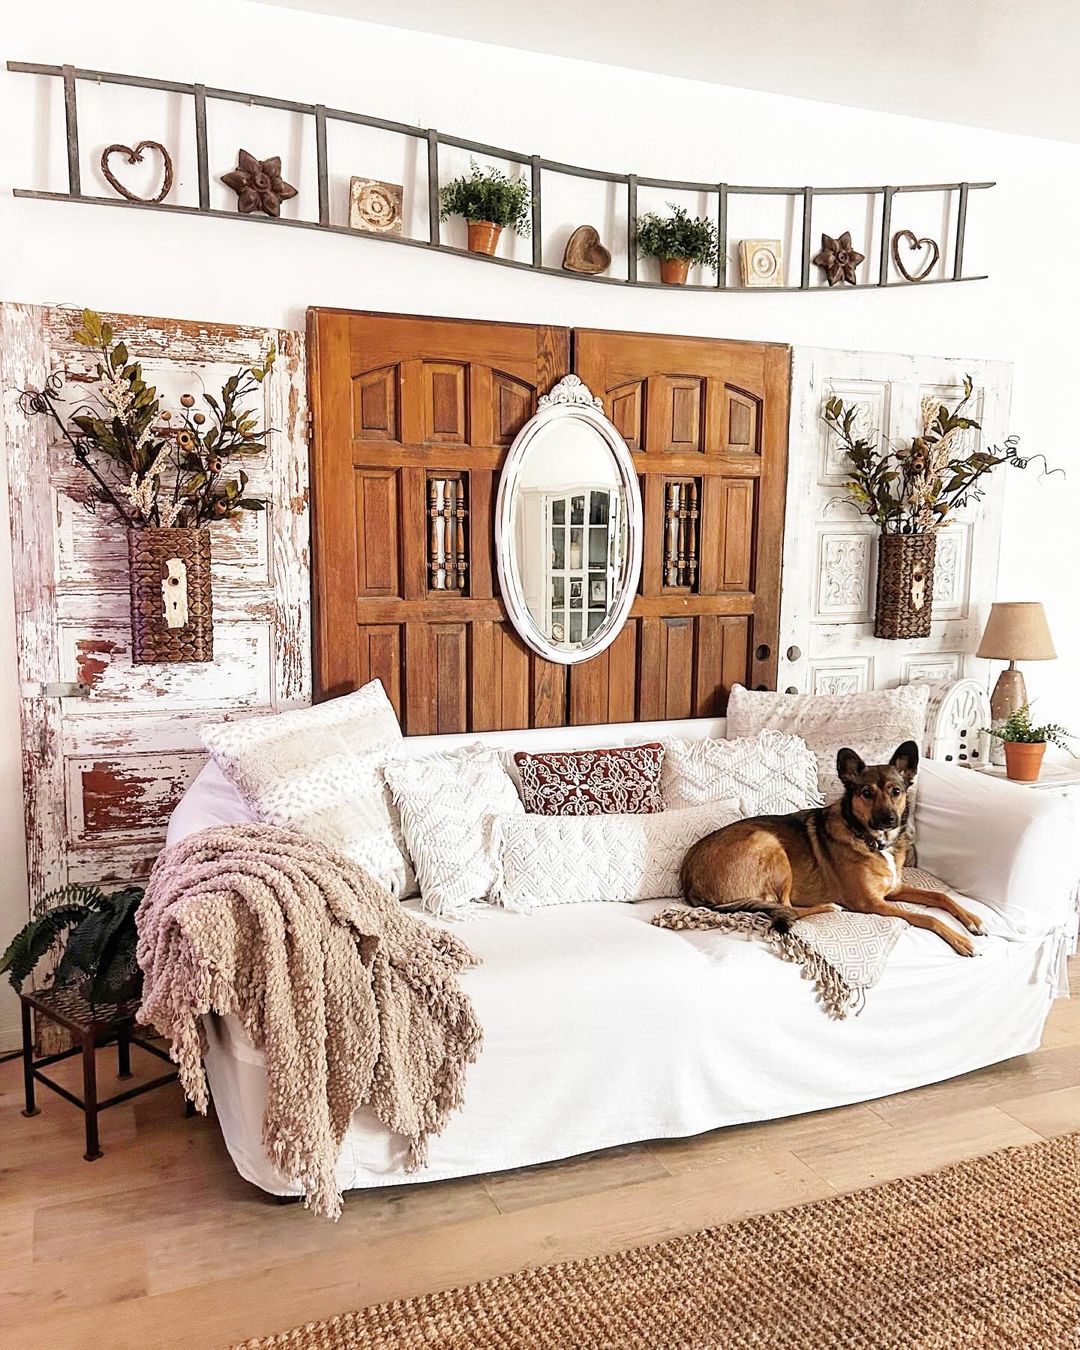 Rustic Textures and Comfy Canine Accents